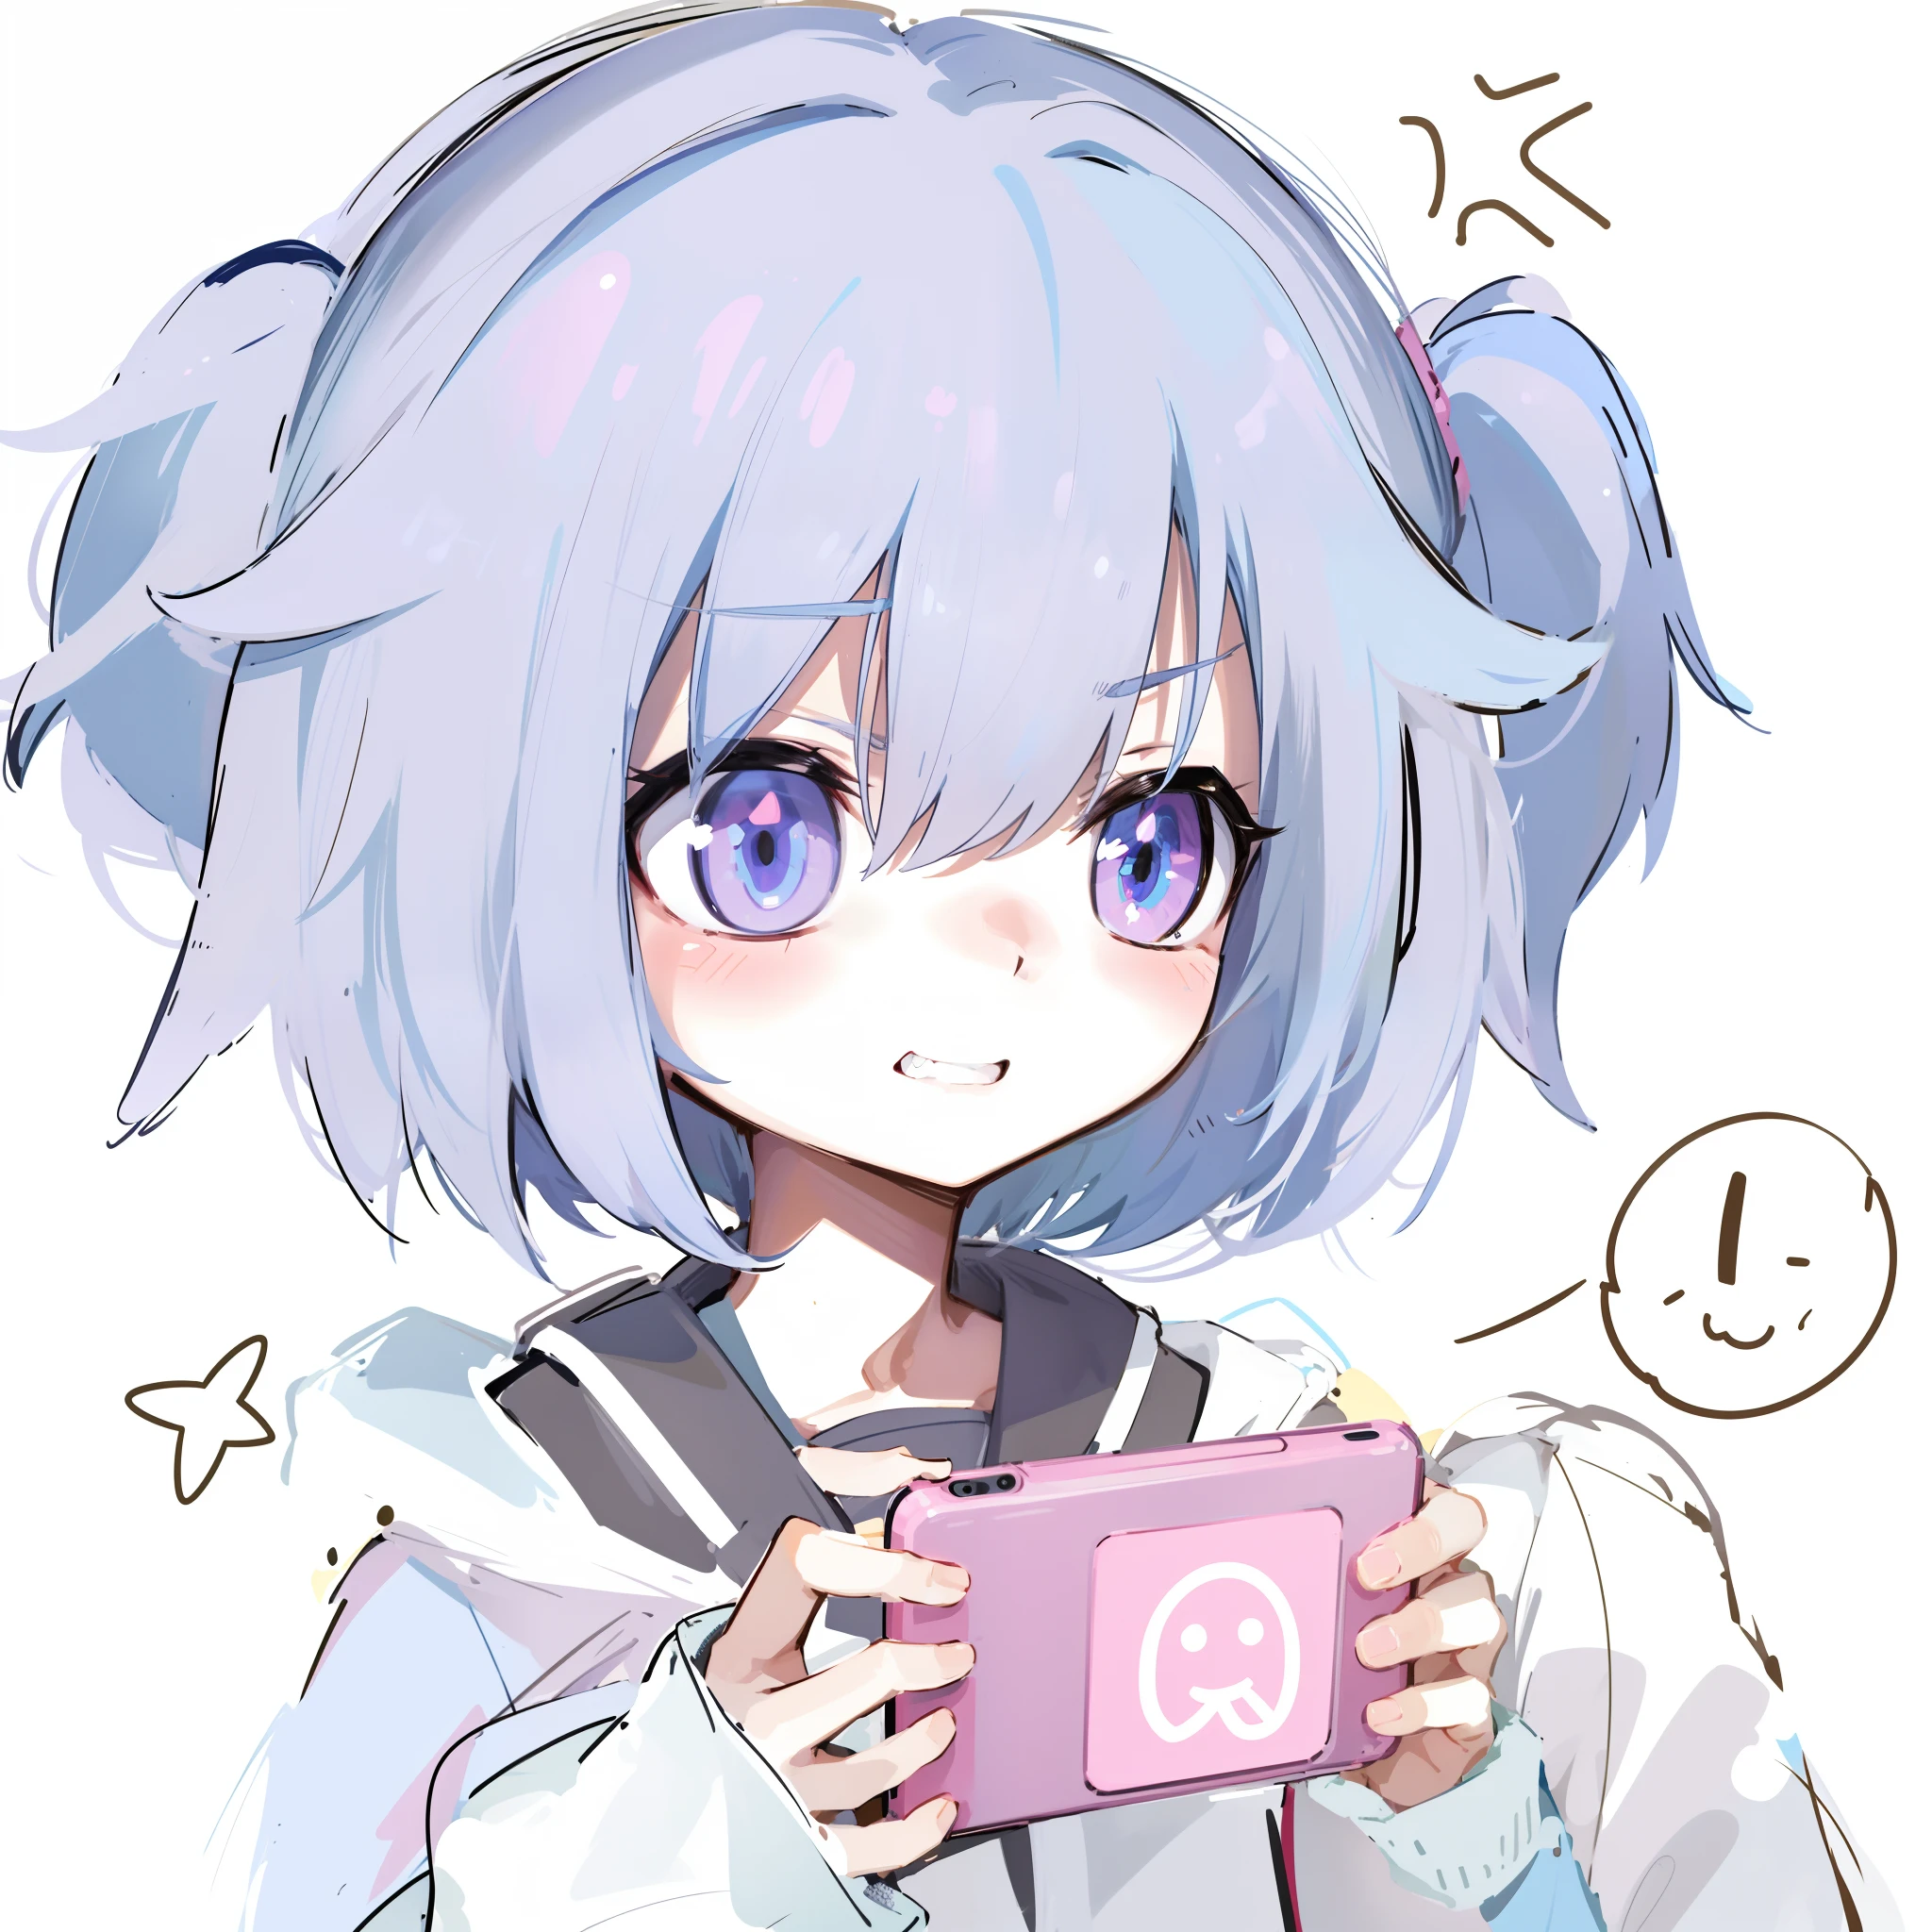 Anime boy with blue hair holding a pink cup，grin face, anime moe art style, accidentally taking a selfie, checking her phone, with index finger, she has a cute expressive face, tired haunted expression, tired and haunted expression, in an anime style, she is holding a smartphone, anime-twitter, Kantai collection style